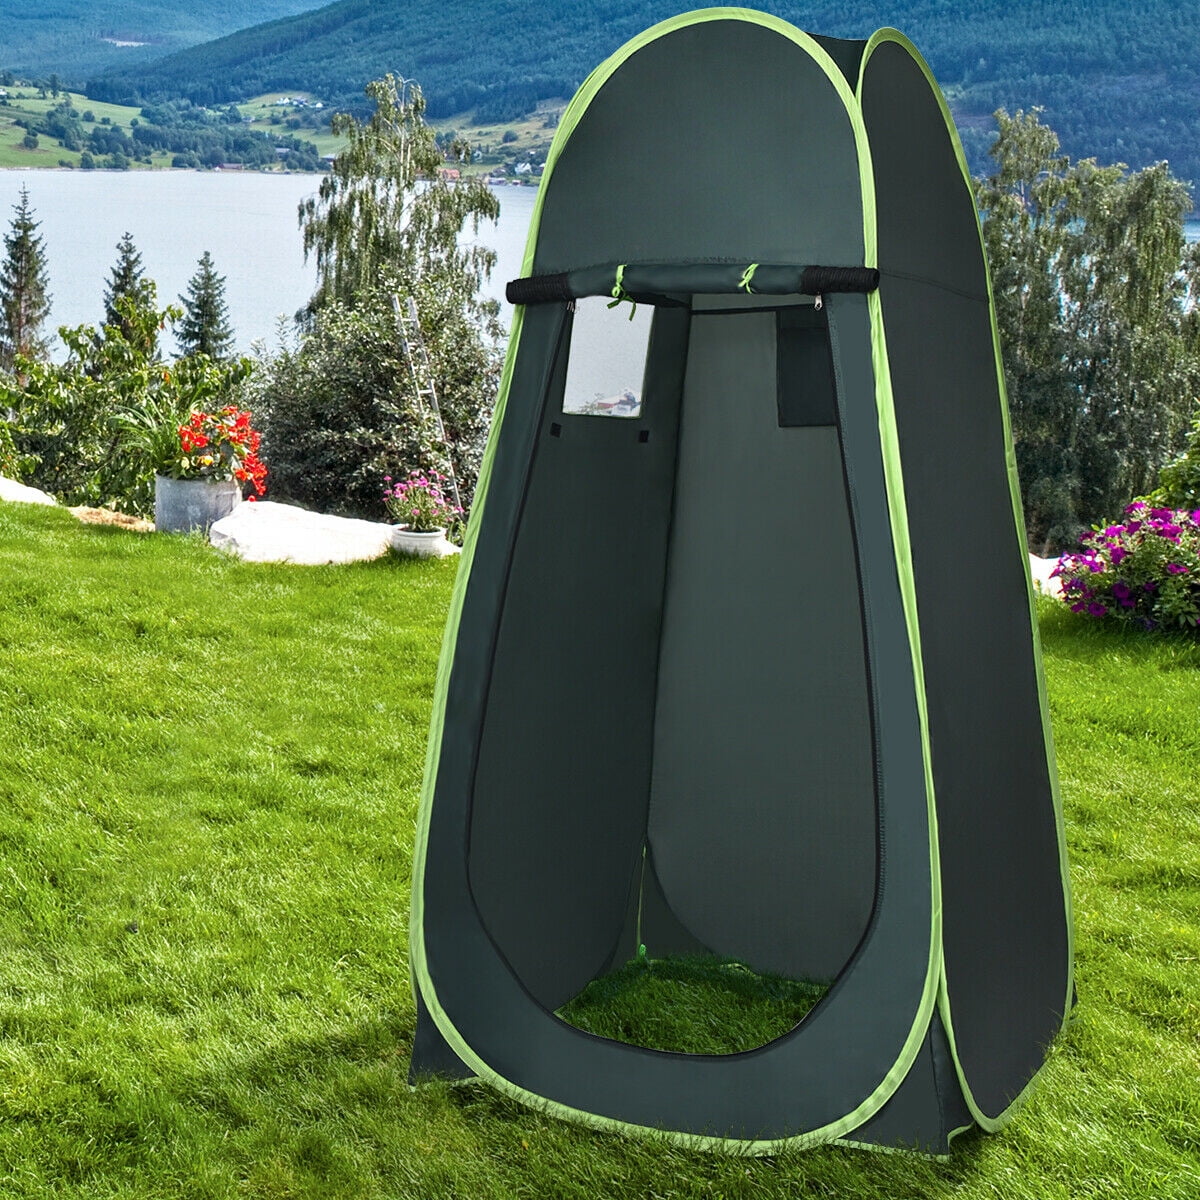 Toilet Portable Travel Green Pop Up Utility Camping Changing Room Shower Tent 